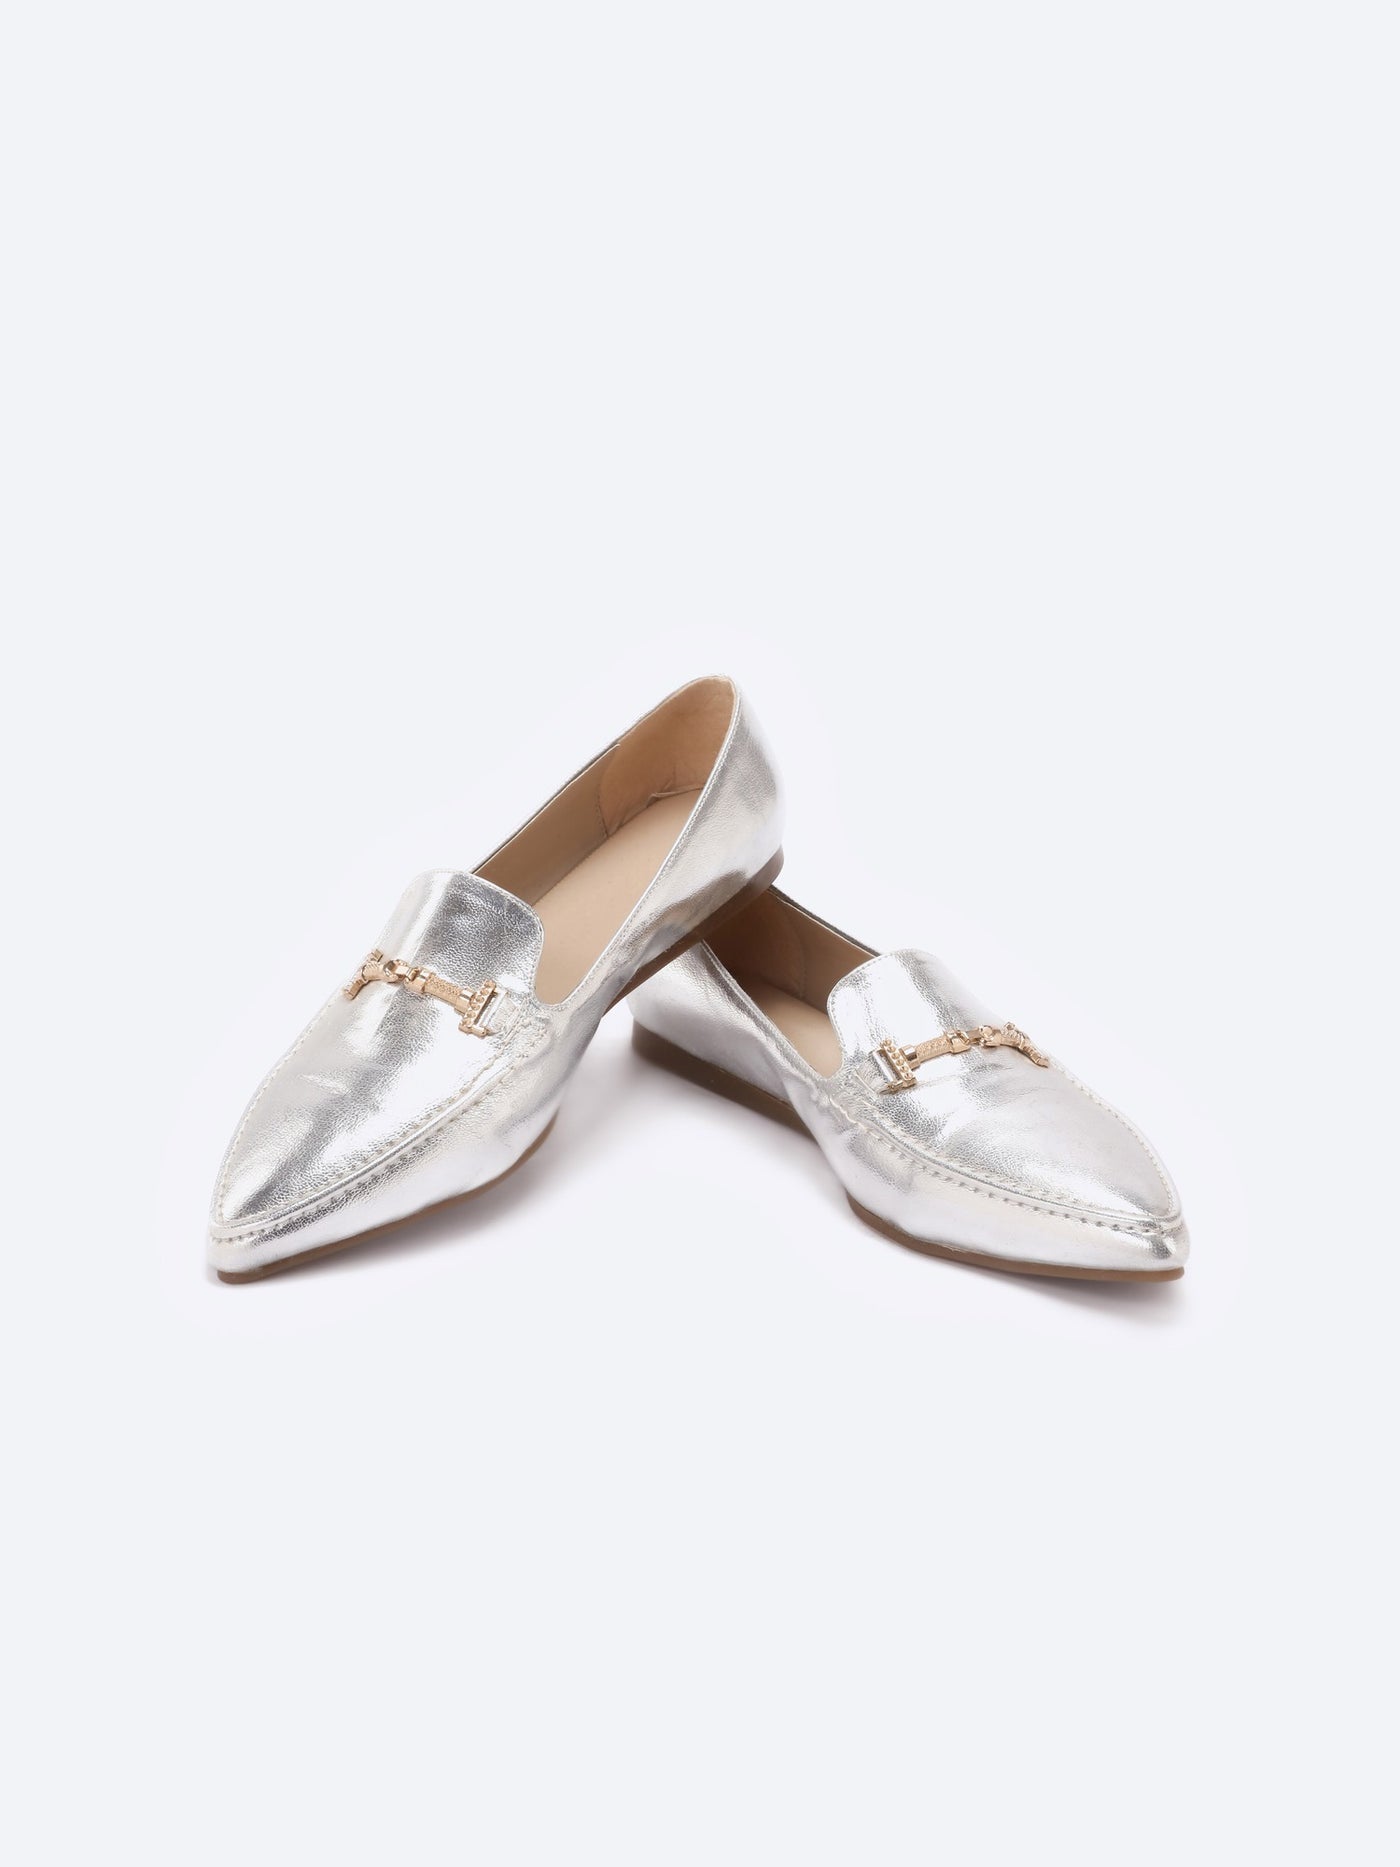 Loafer Shoes - Metallic